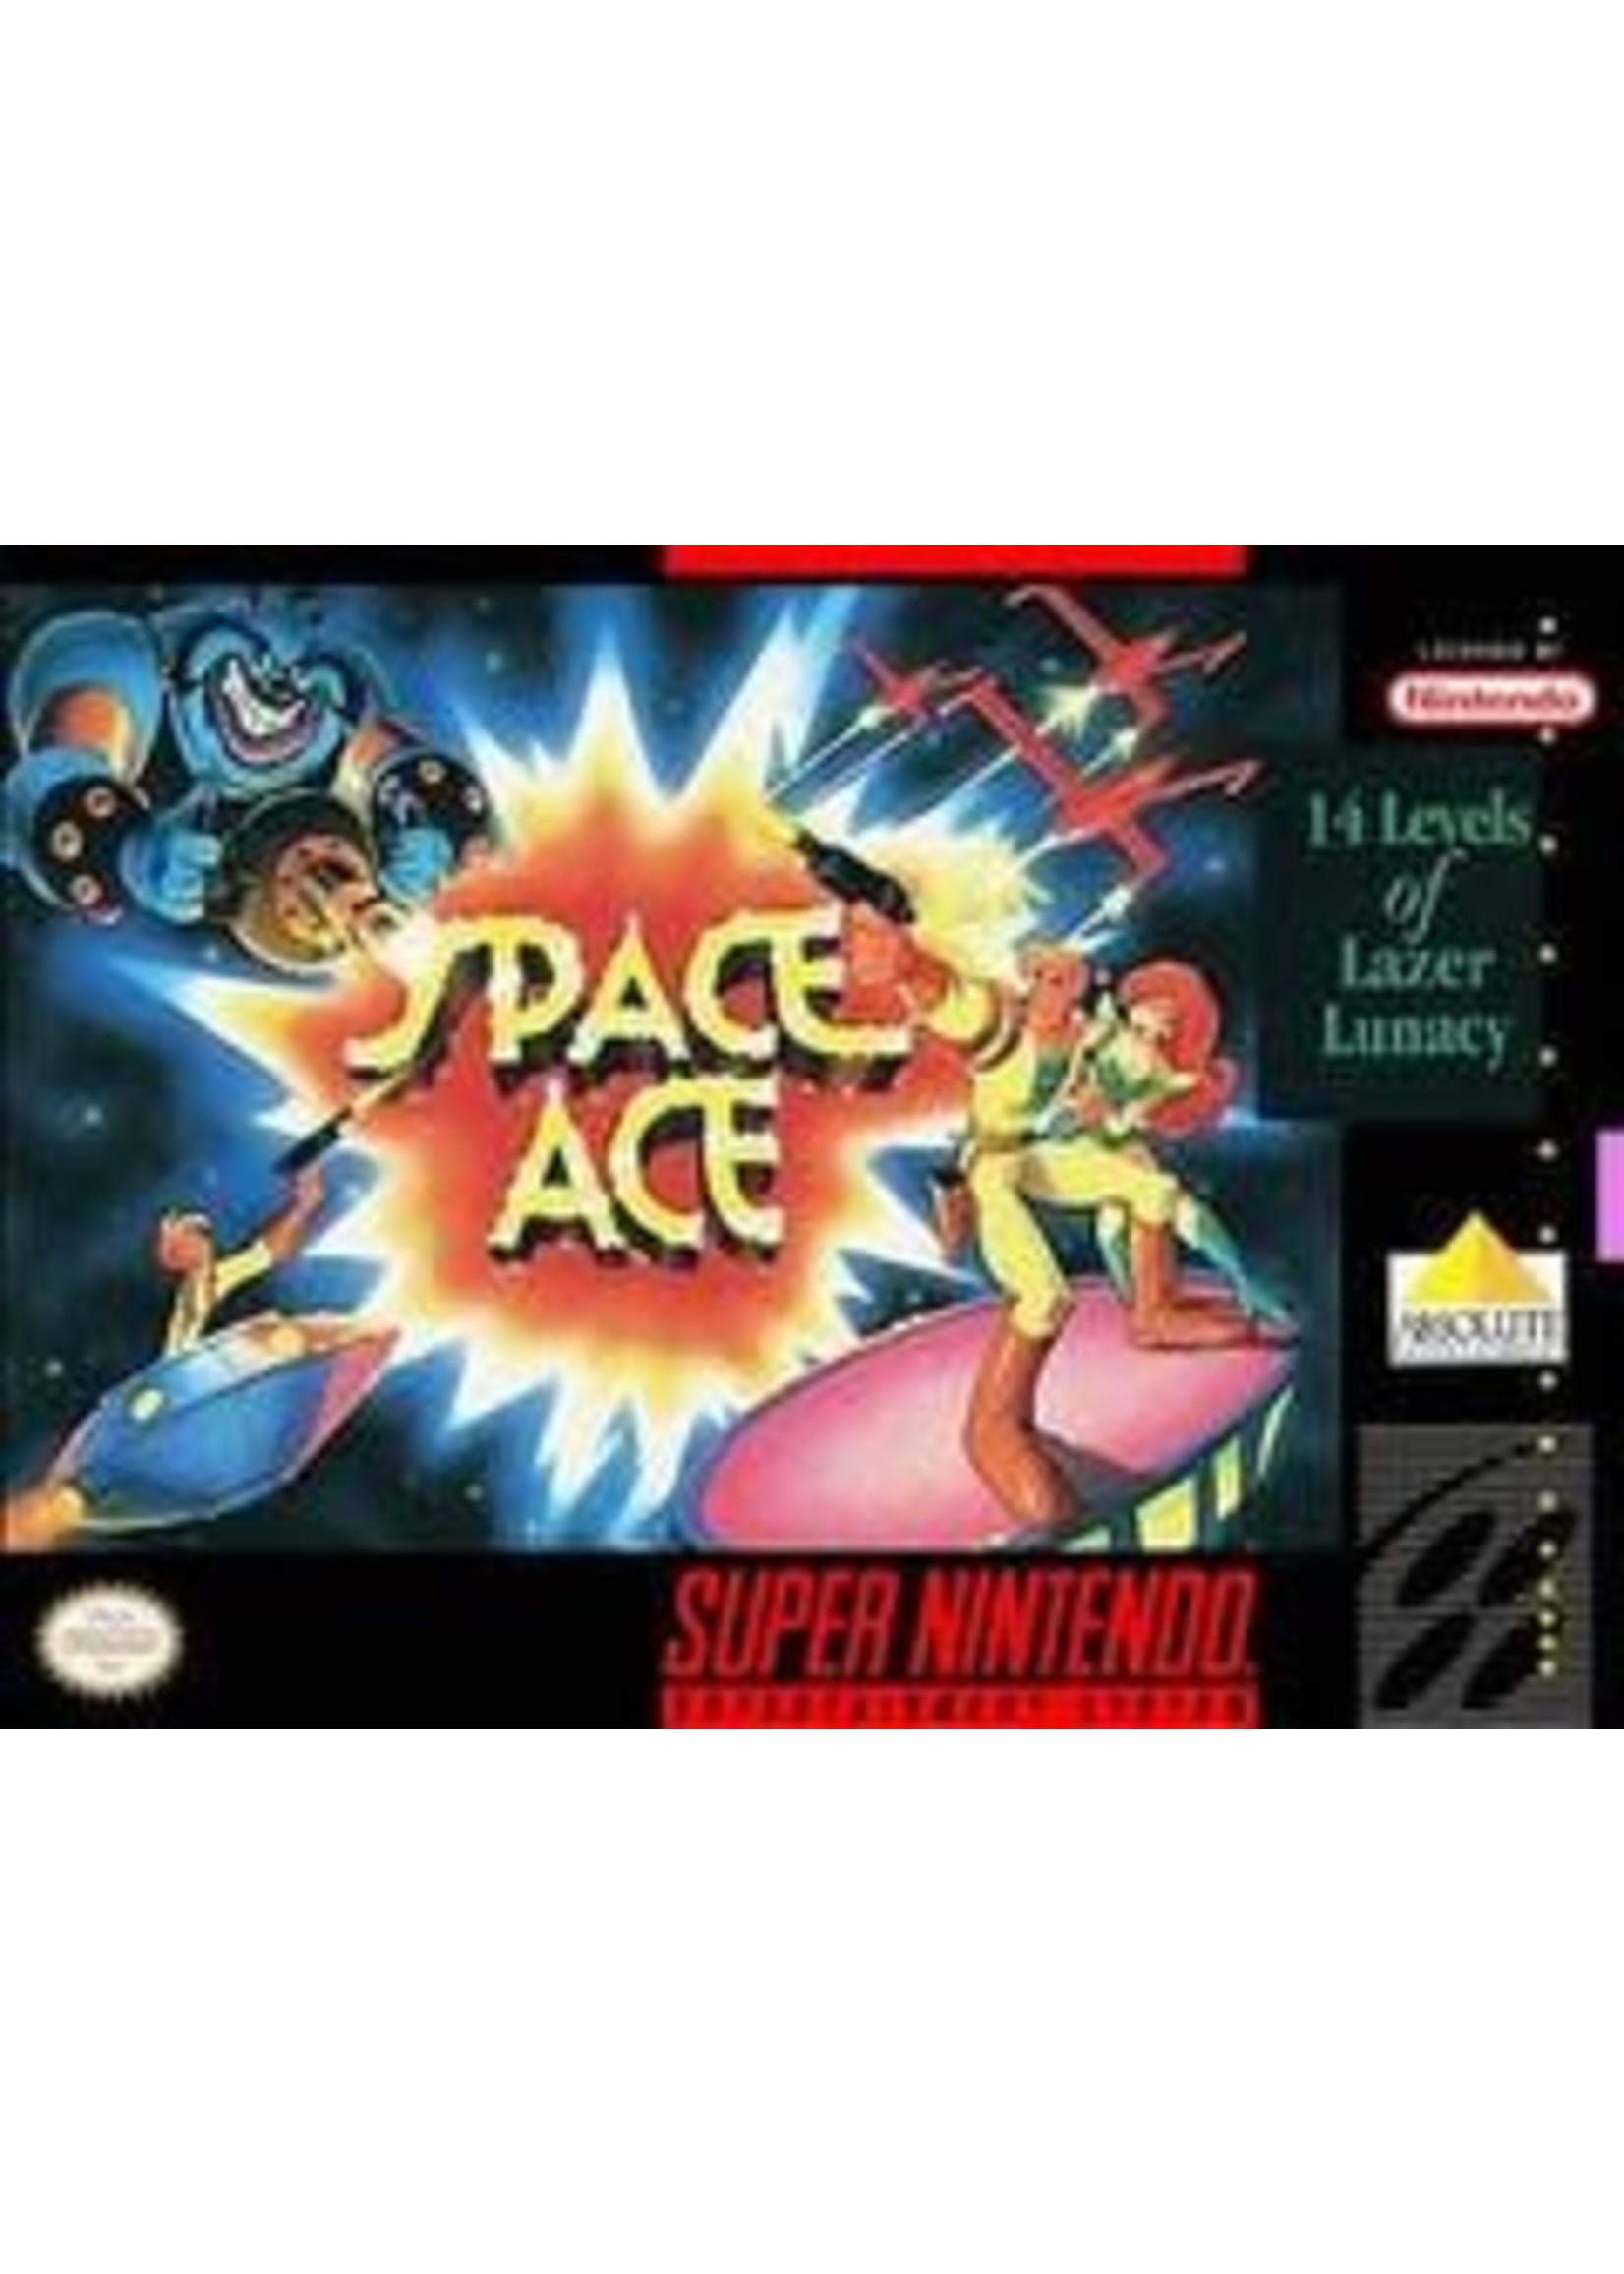 Space Ace Super Nintendo CART ONLY